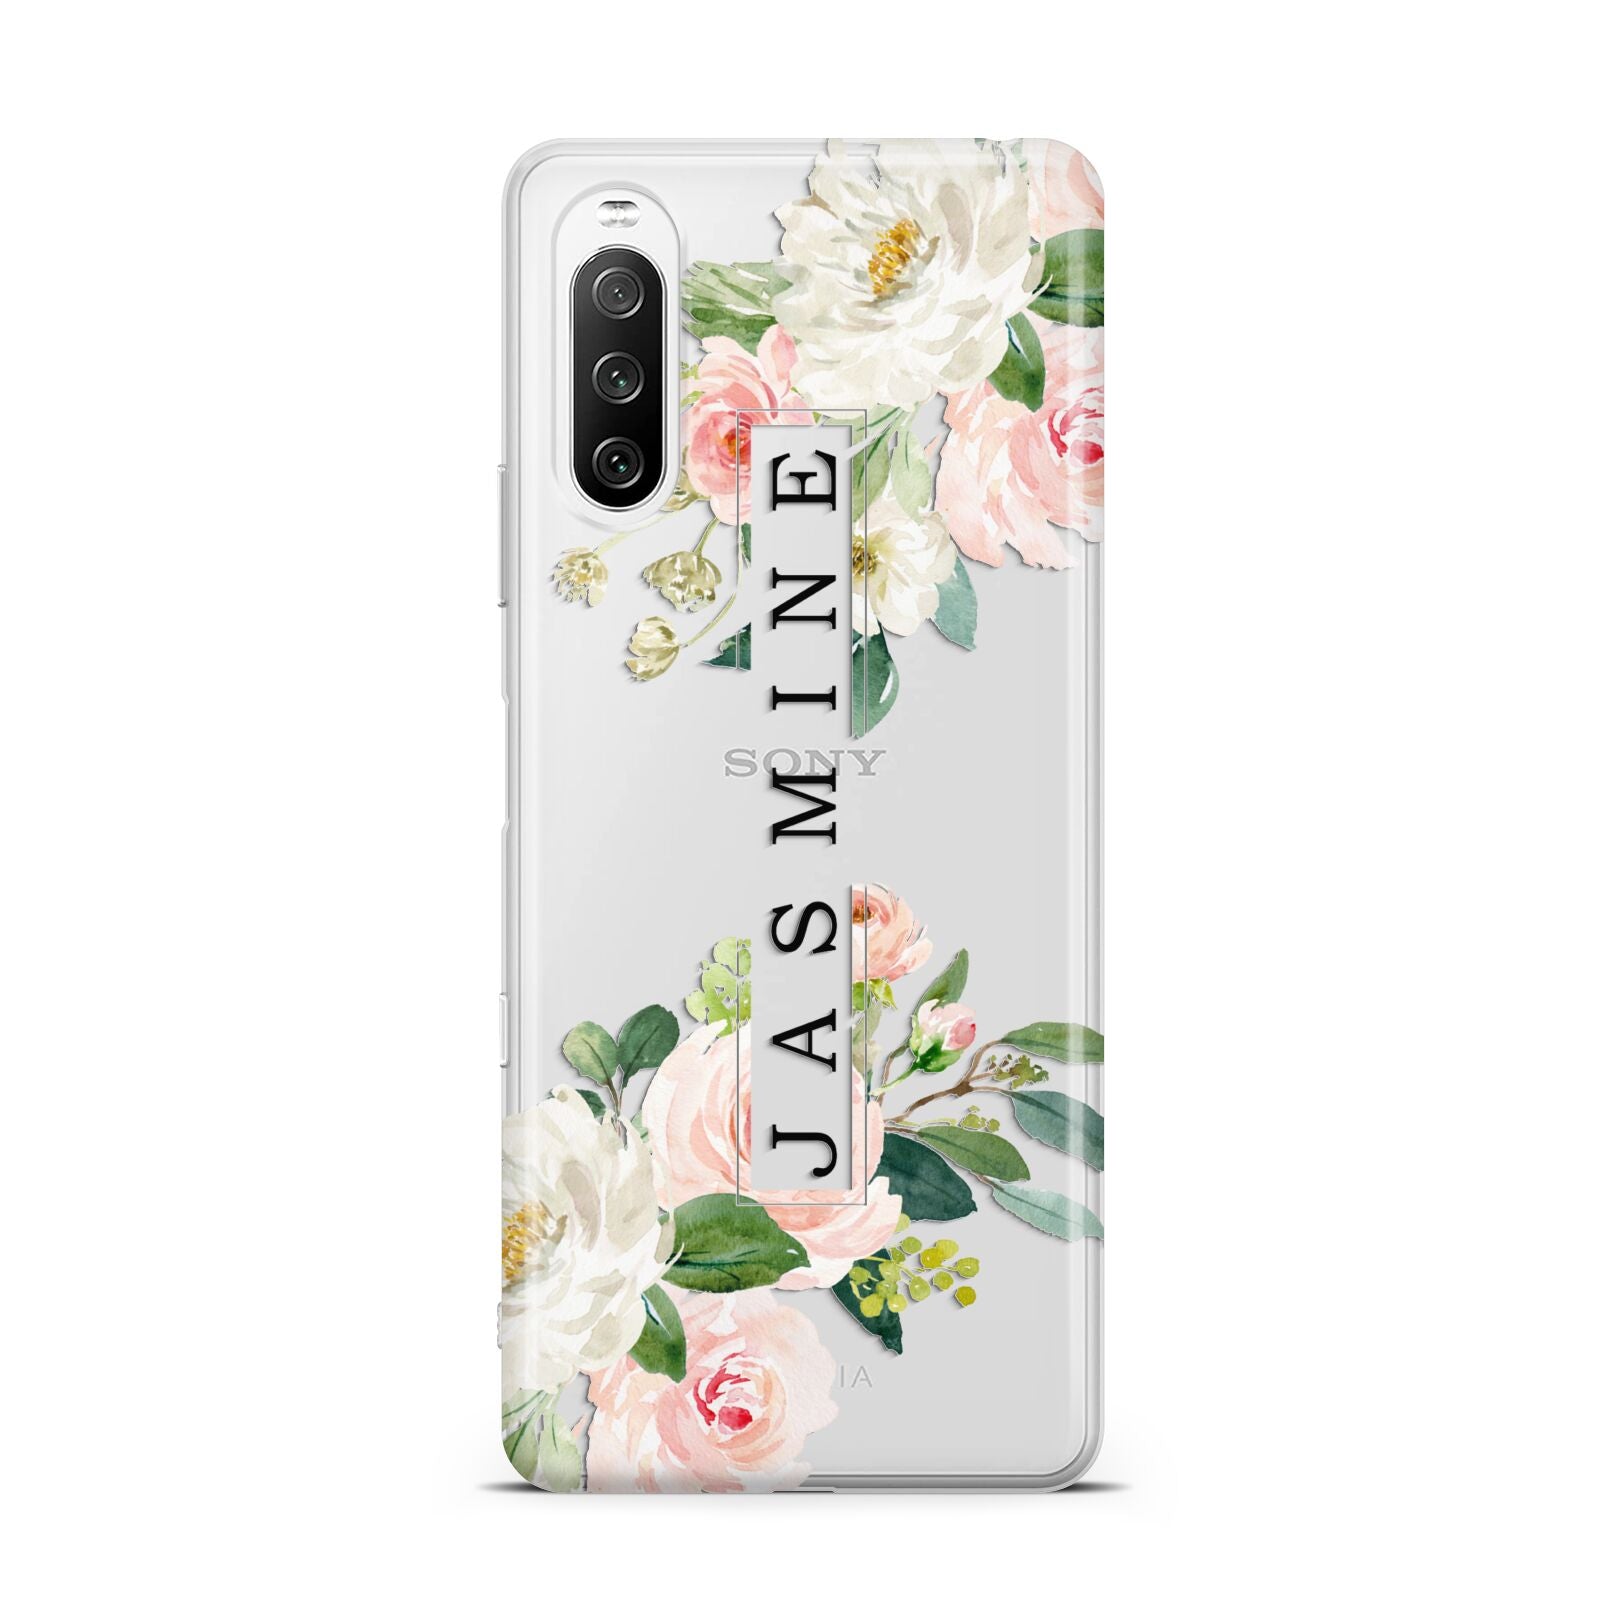 Personalised Floral Wreath with Name Sony Xperia 10 III Case